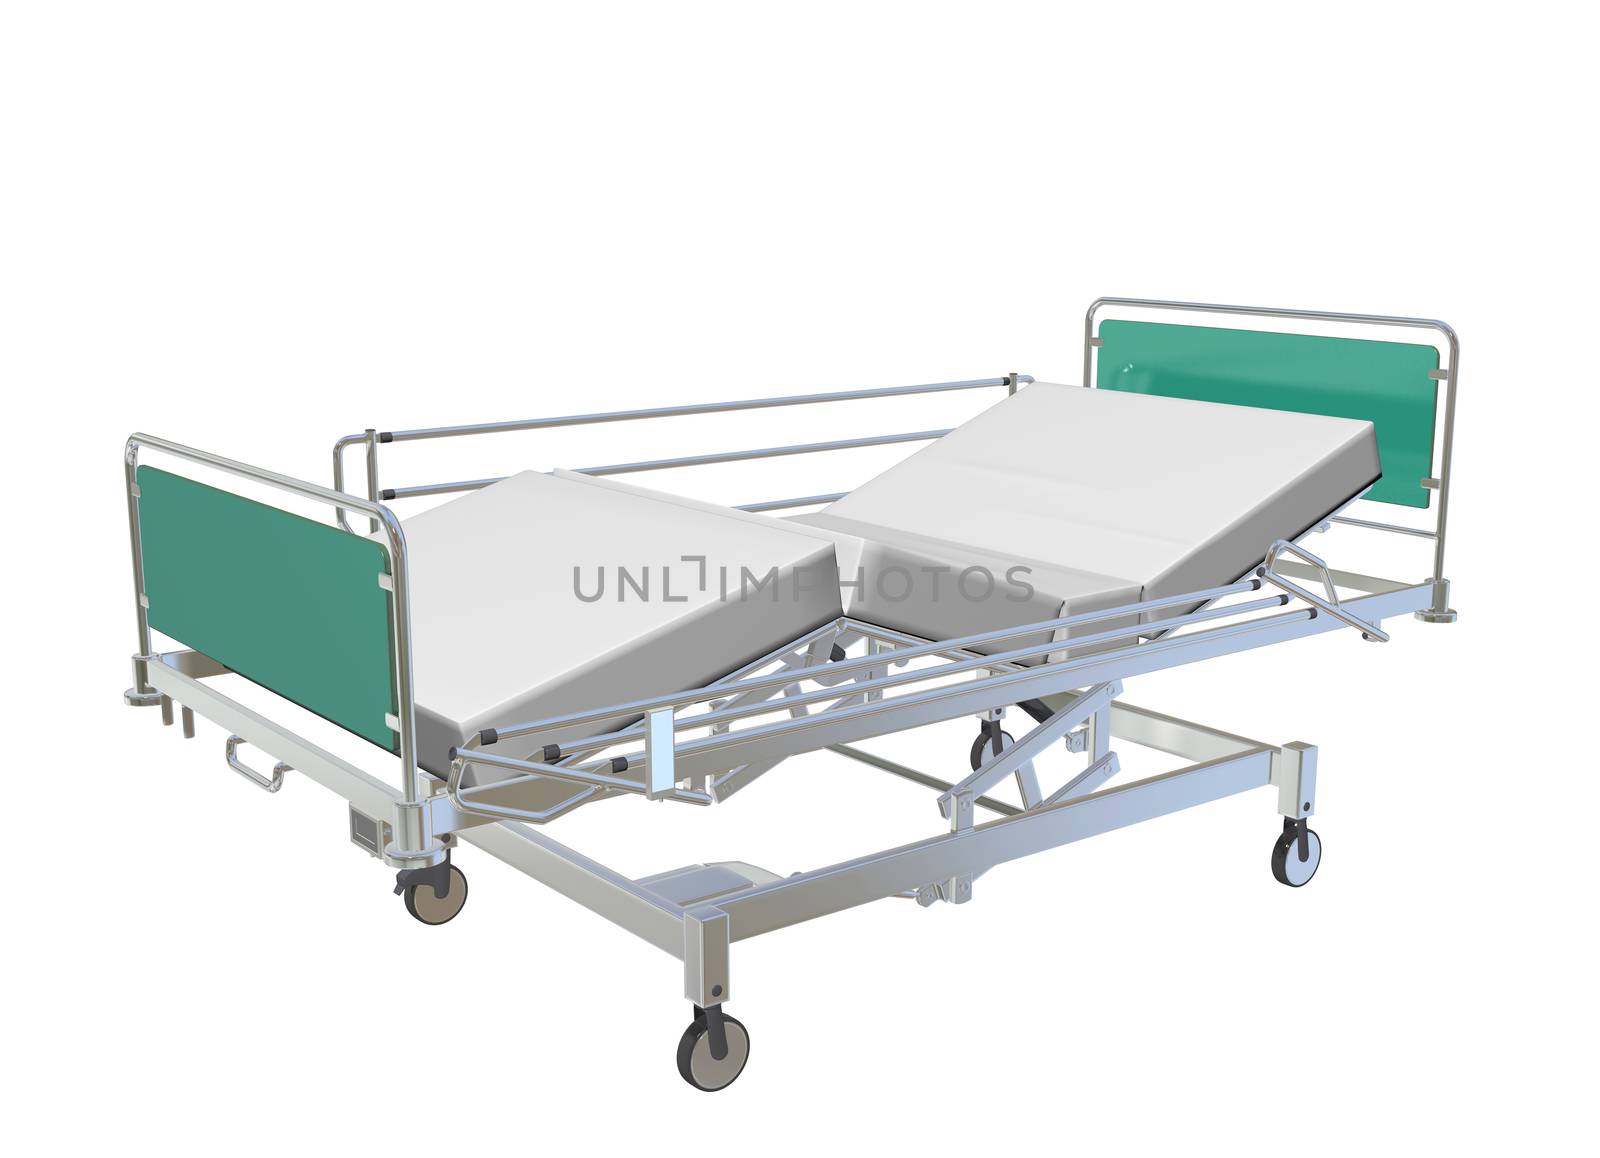 Green and grey mobile adjustable hospital bed with recliner and side guards, 3D illustration, isolated against a white background